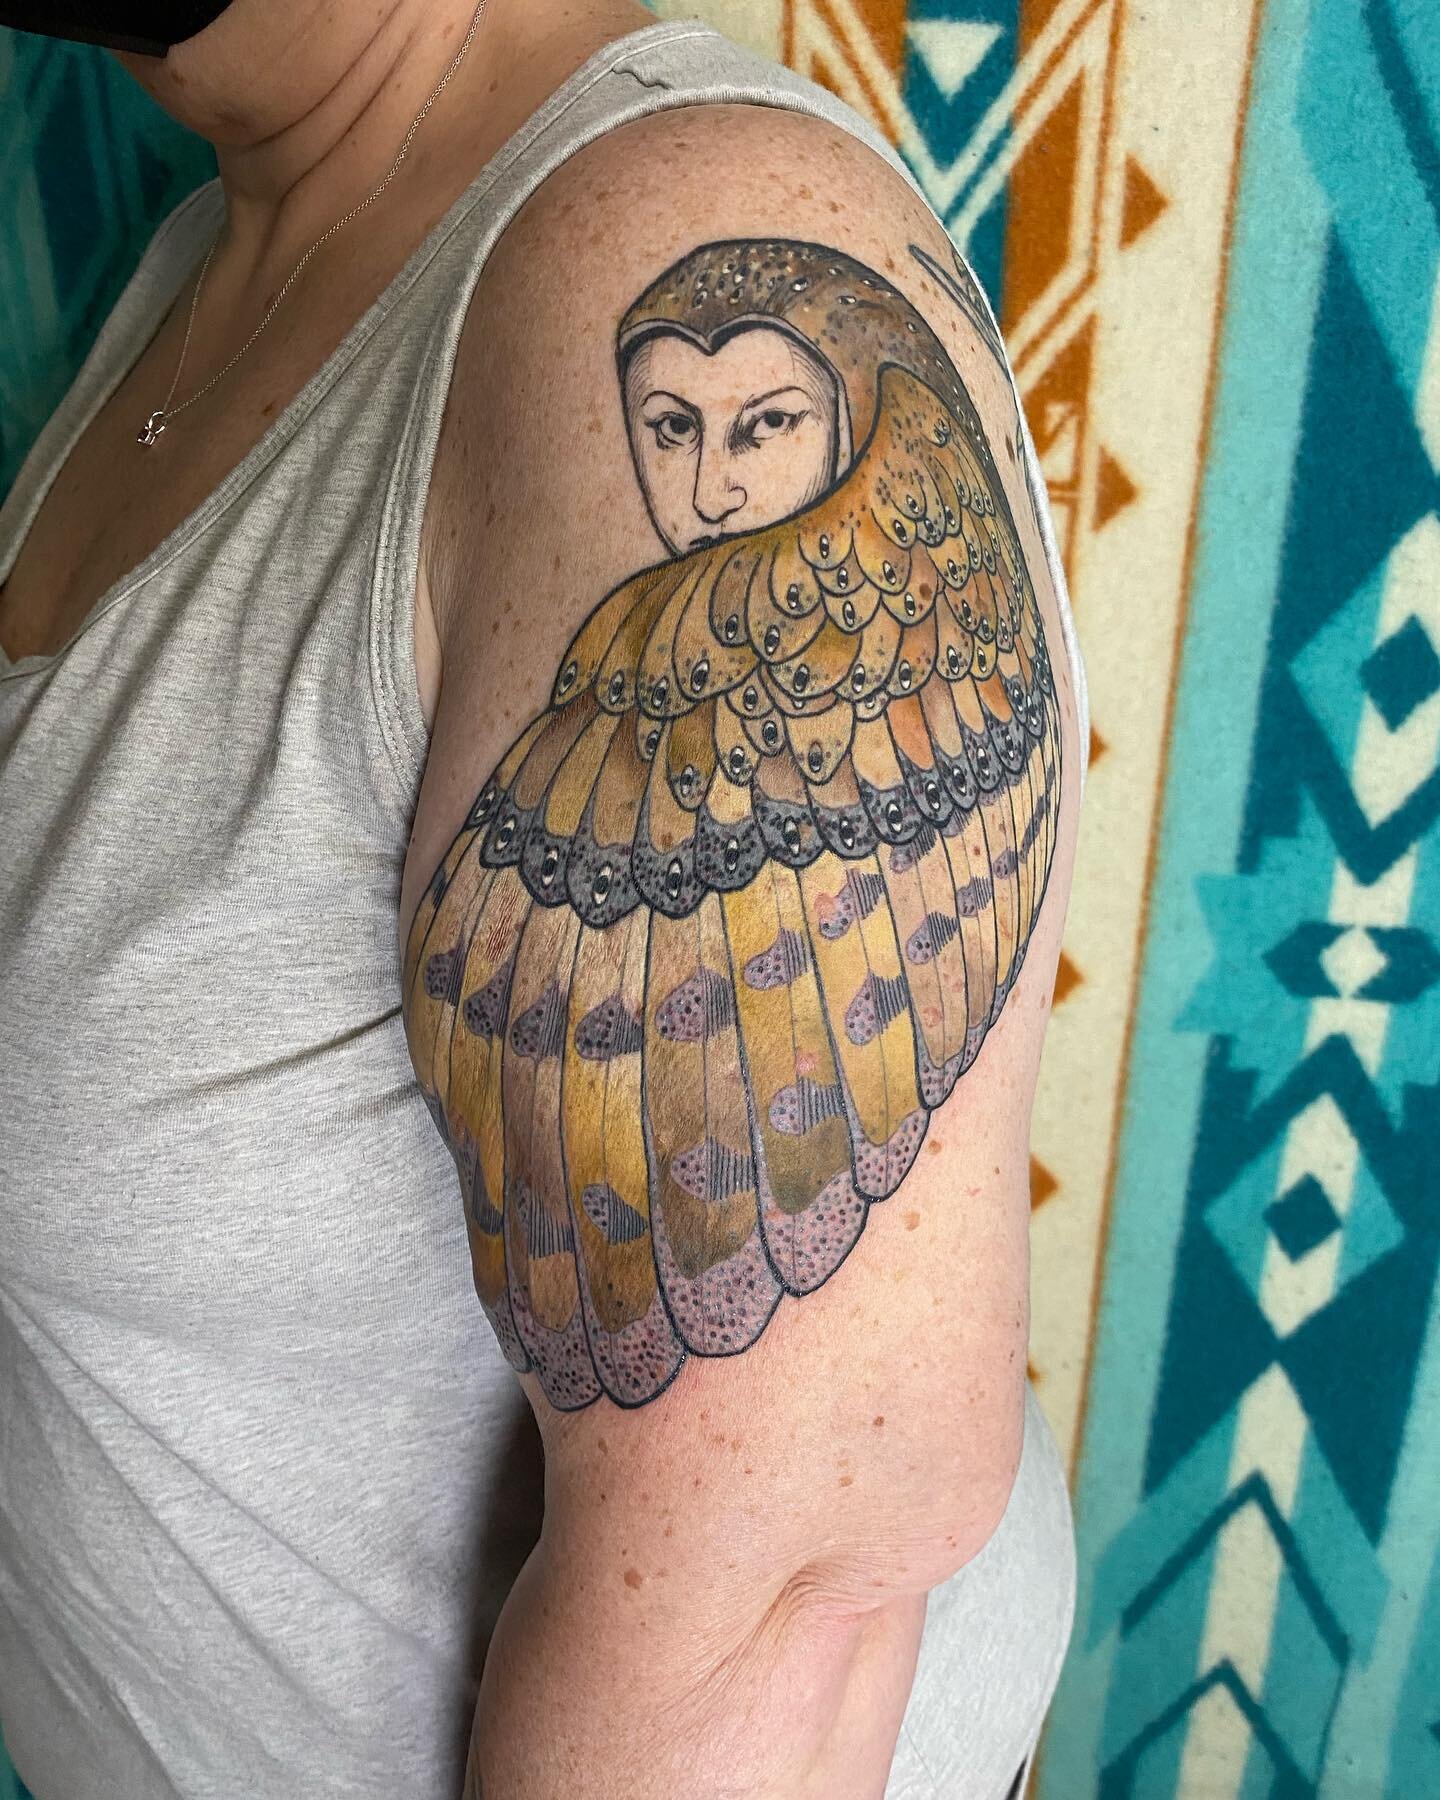 she&rsquo;s ANGRY still ✨but✨ I got to finish this flash barn owl hermit the other week! I really love how it hugs her body 💛 Thank you for getting tattoos from me for the whole nine years I&rsquo;ve been tattooing, Paige!!

ETA this was in drafts s